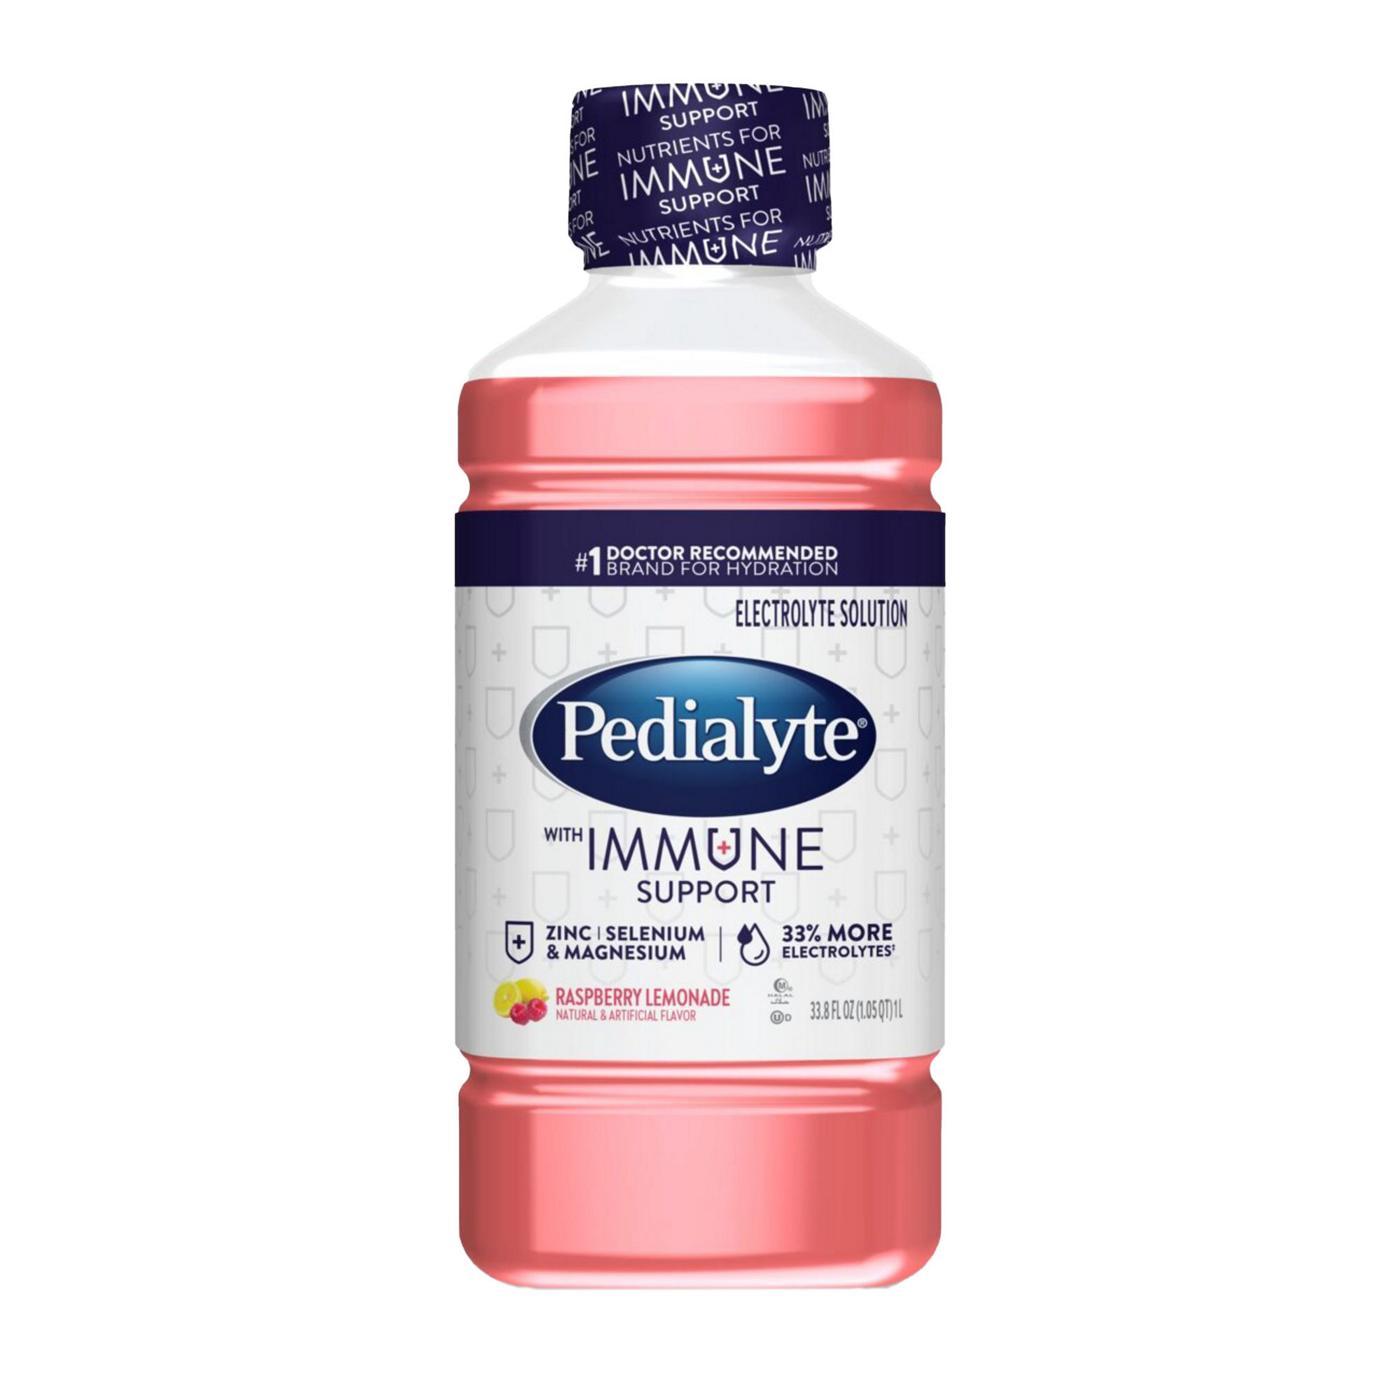 Pedialyte with Immune Support Electrolyte Solution - Raspberry Lemonade; image 1 of 10